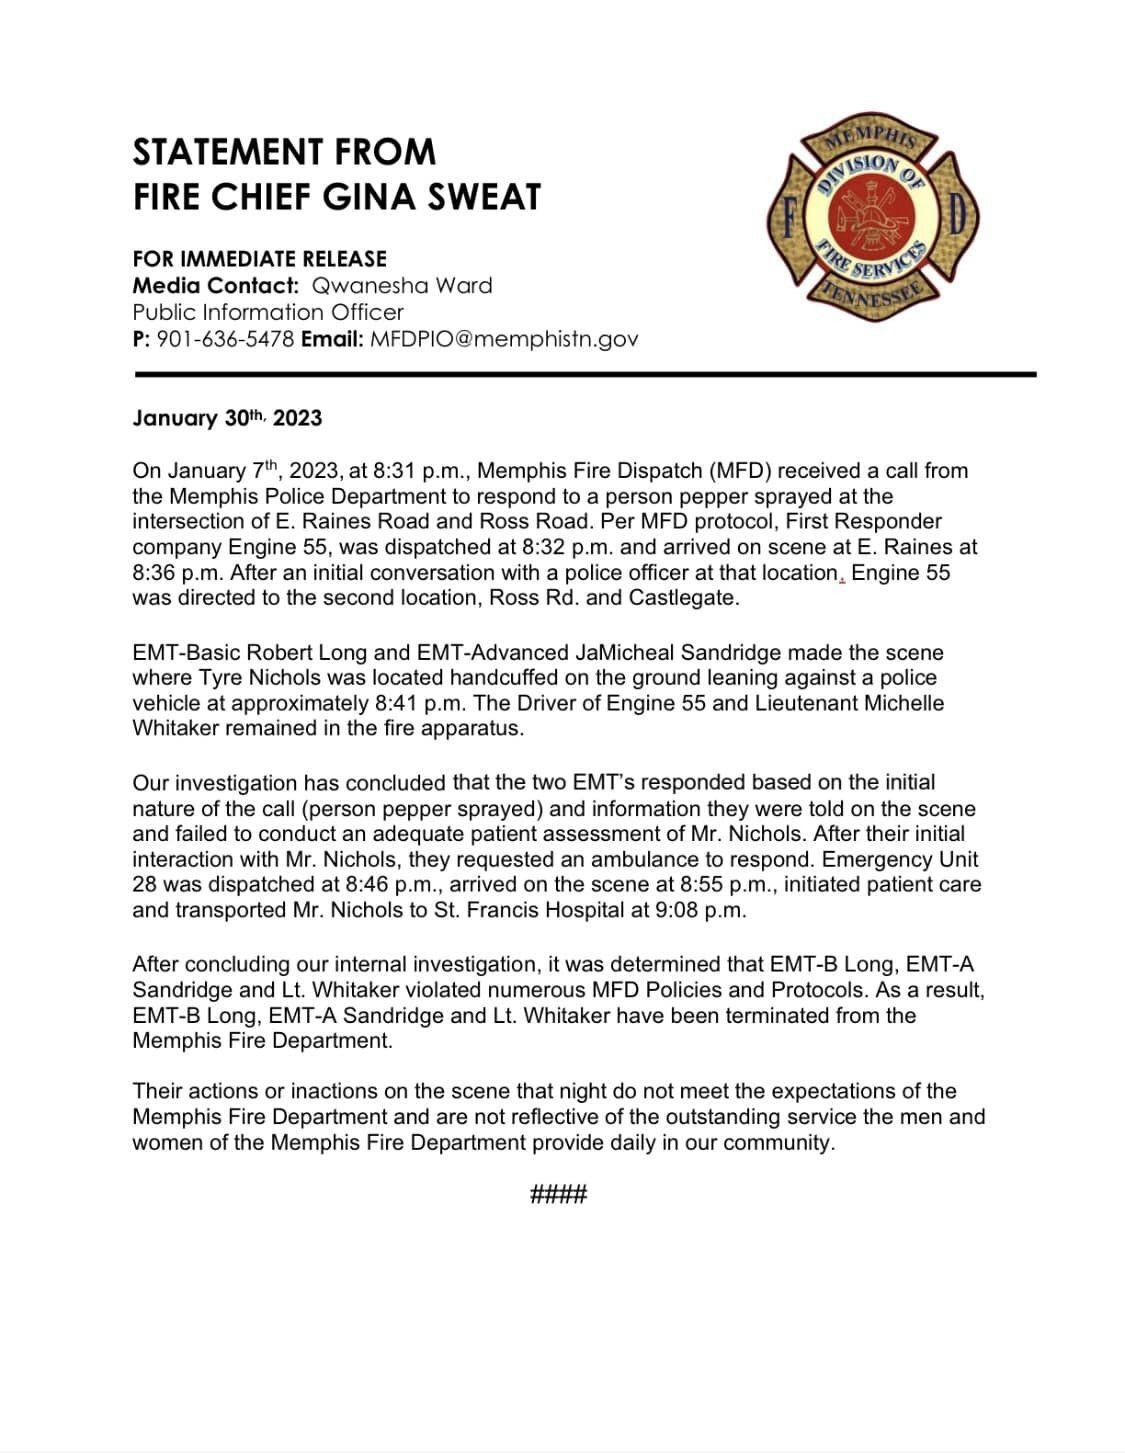 A statement confirming two EMTs have been fired from the Memphis Fire Department.